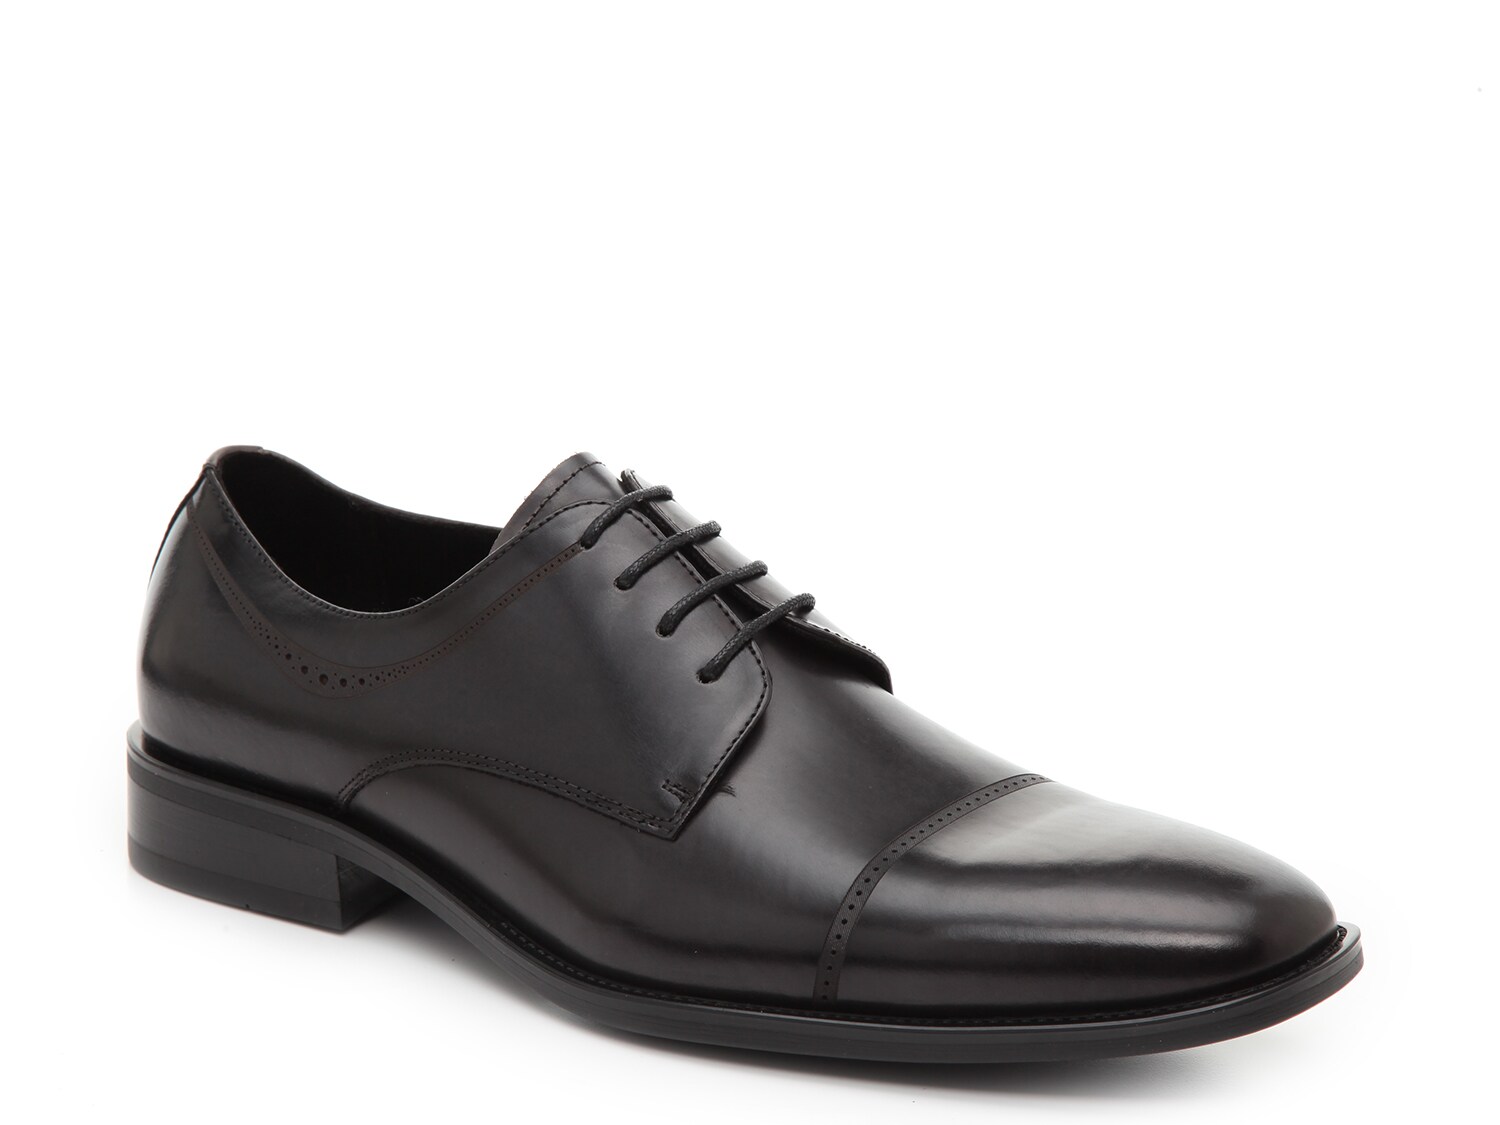 Kenneth Cole Leisure Hours Cap Toe Oxford - Free Shipping | DSW